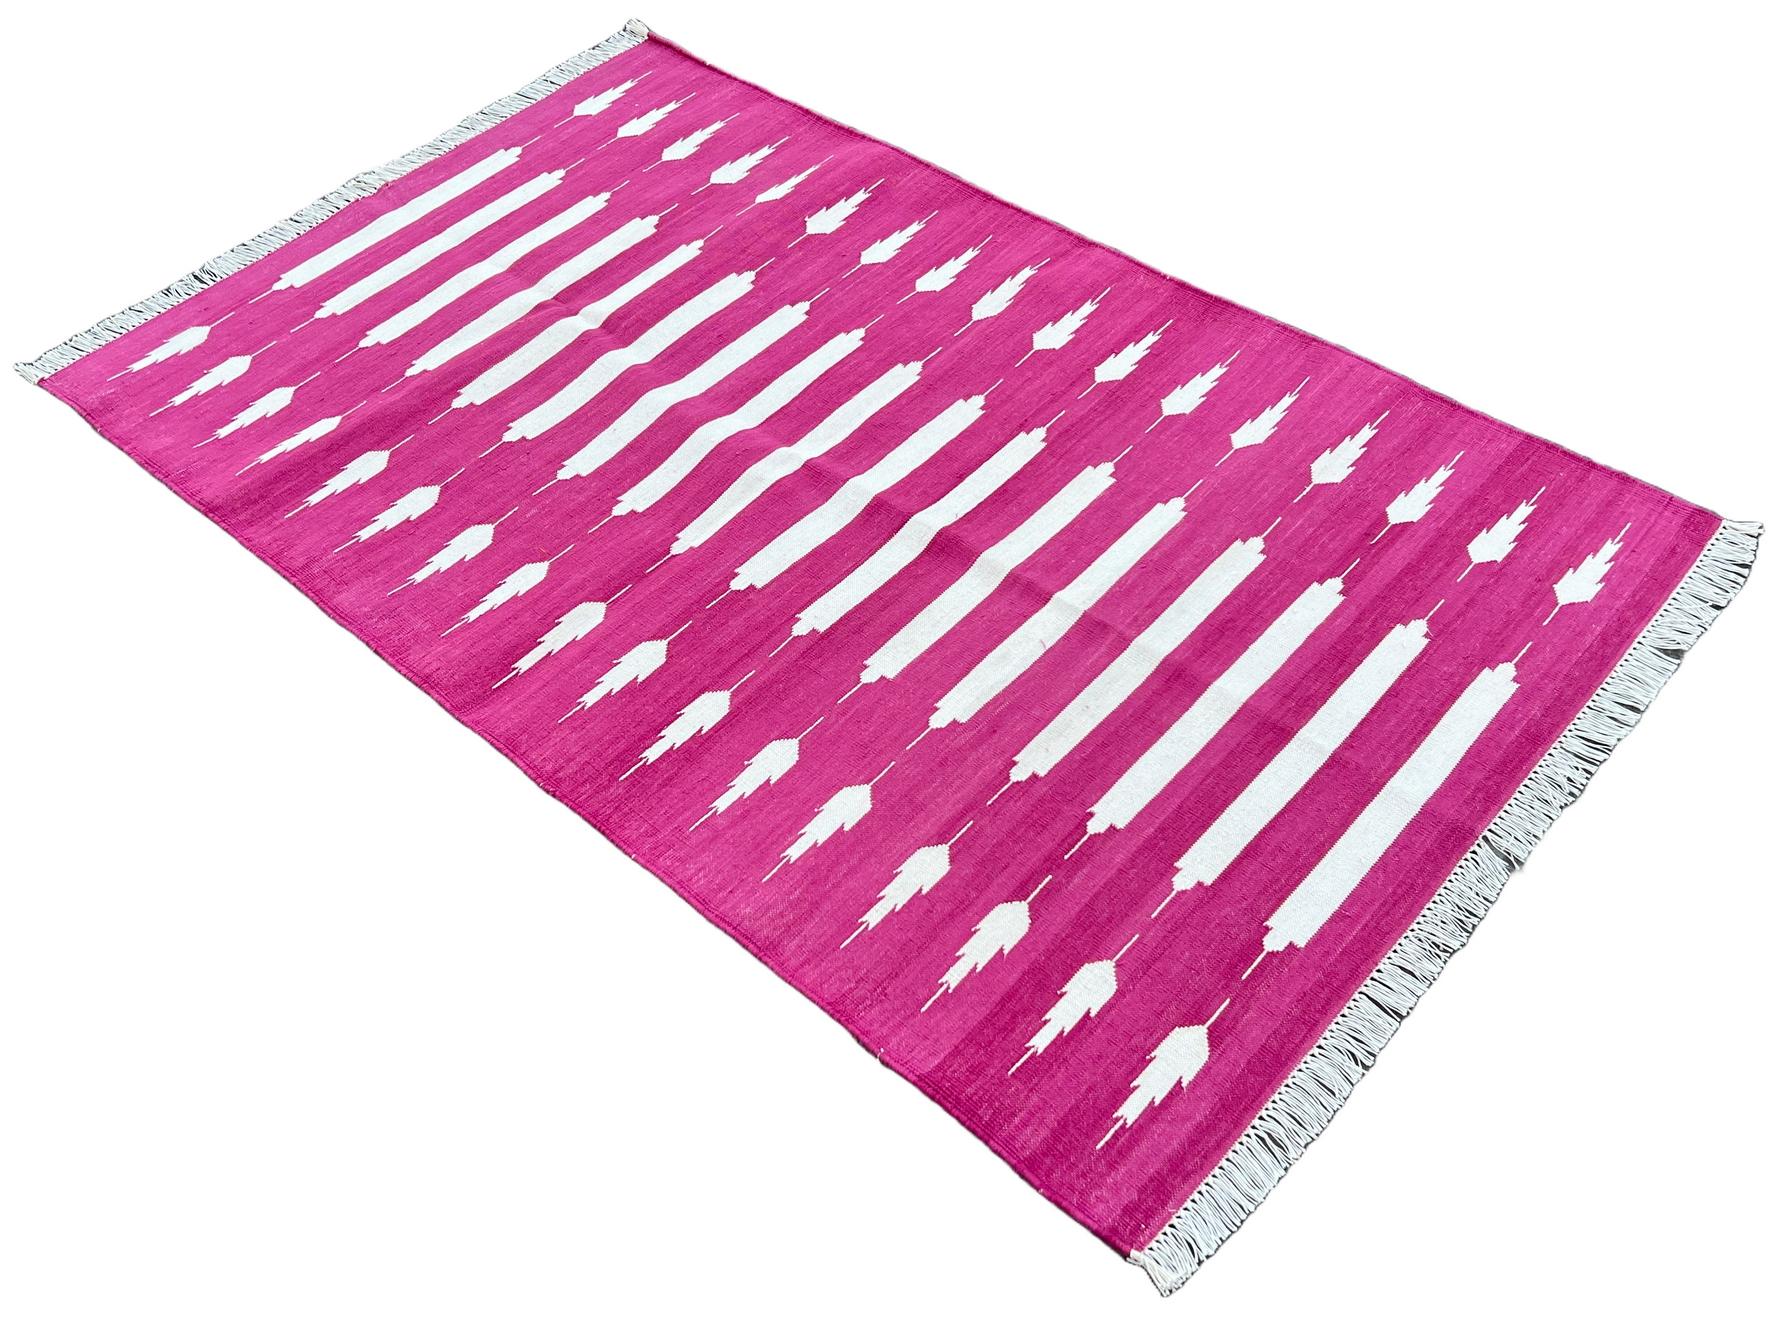 Cotton Vegetable Dyed Pink And White Striped Indian Dhurrie Rug-3'x5' 
These special flat-weave dhurries are hand-woven with 15 ply 100% cotton yarn. Due to the special manufacturing techniques used to create our rugs, the size and color of each